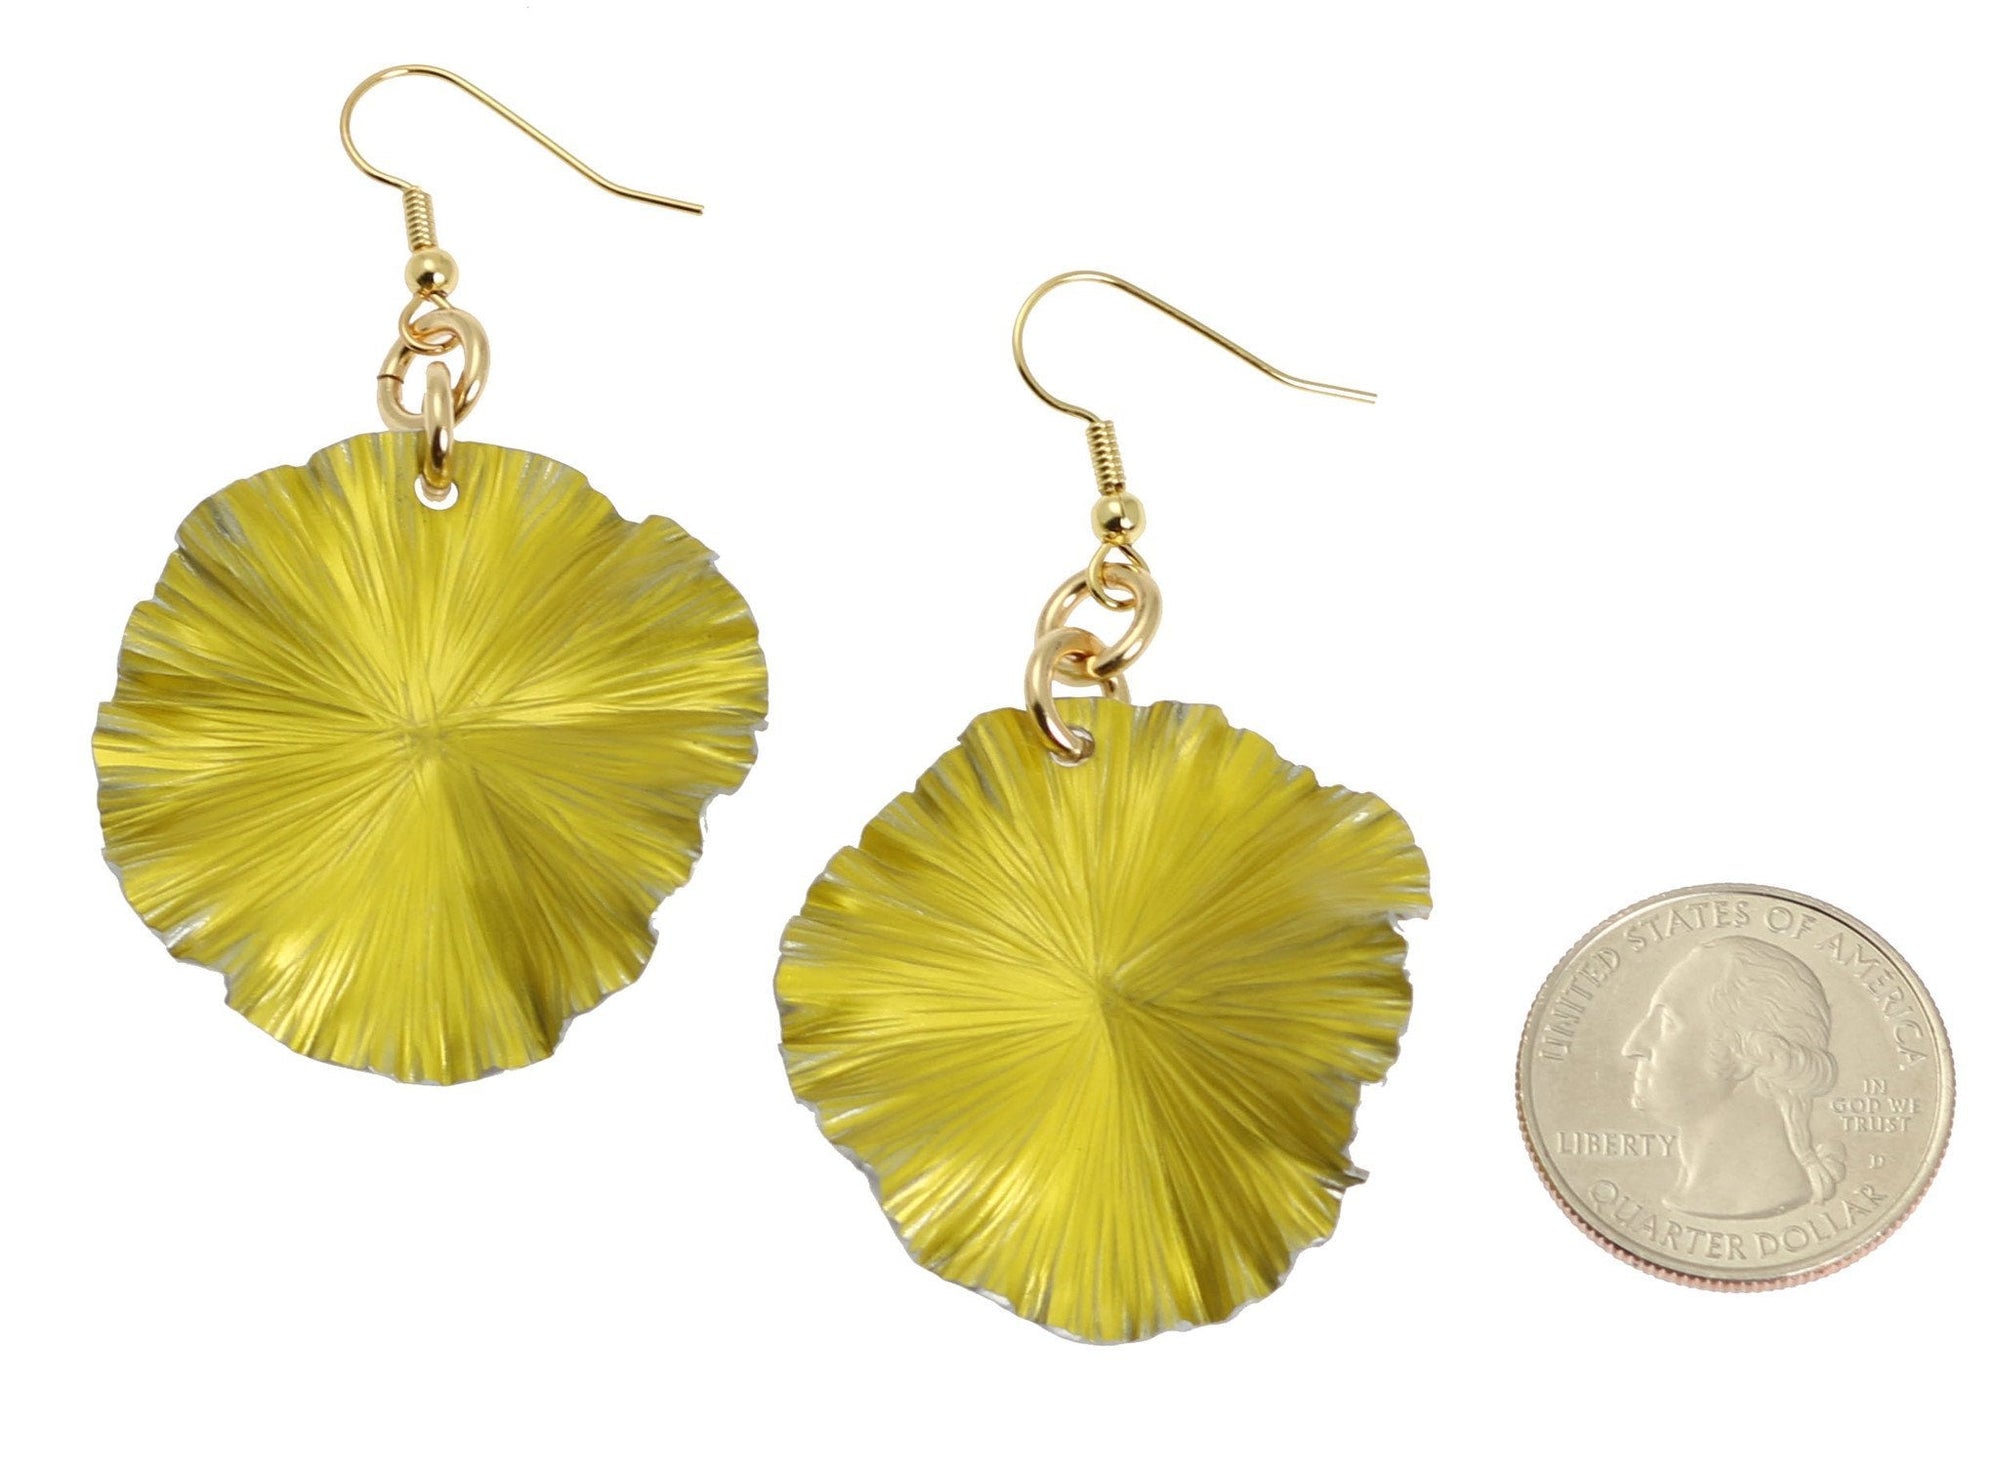 Size of Yellow Anodized Aluminum Lily Pad Earrings